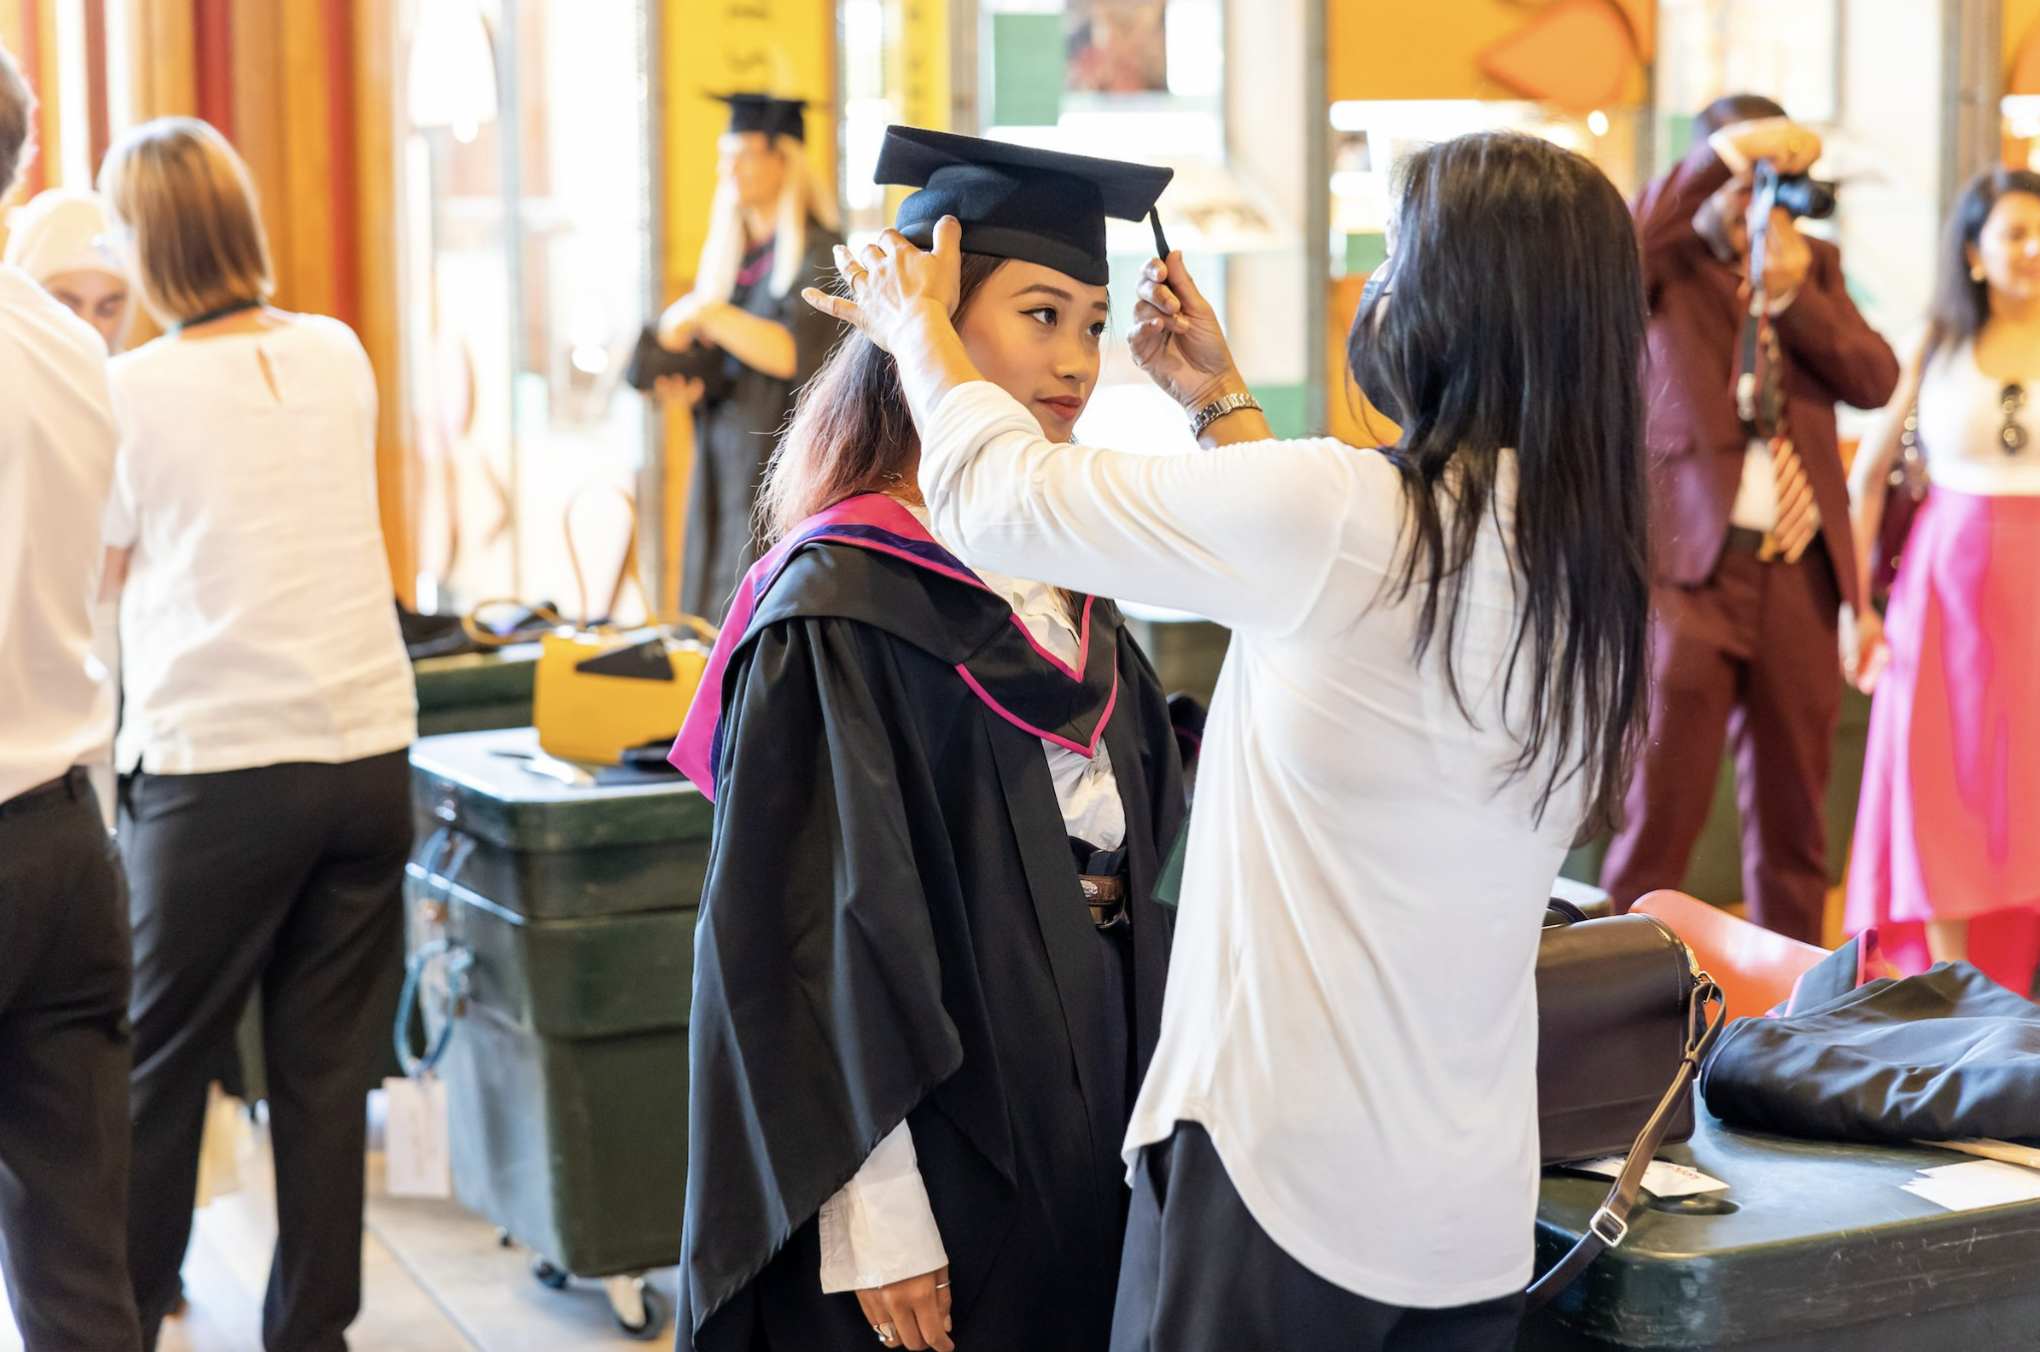 London College of Fashion, Class of 2022 graduation ceremonies, Royal Festival Hall at Southbank Centre | Photography: David Poultney